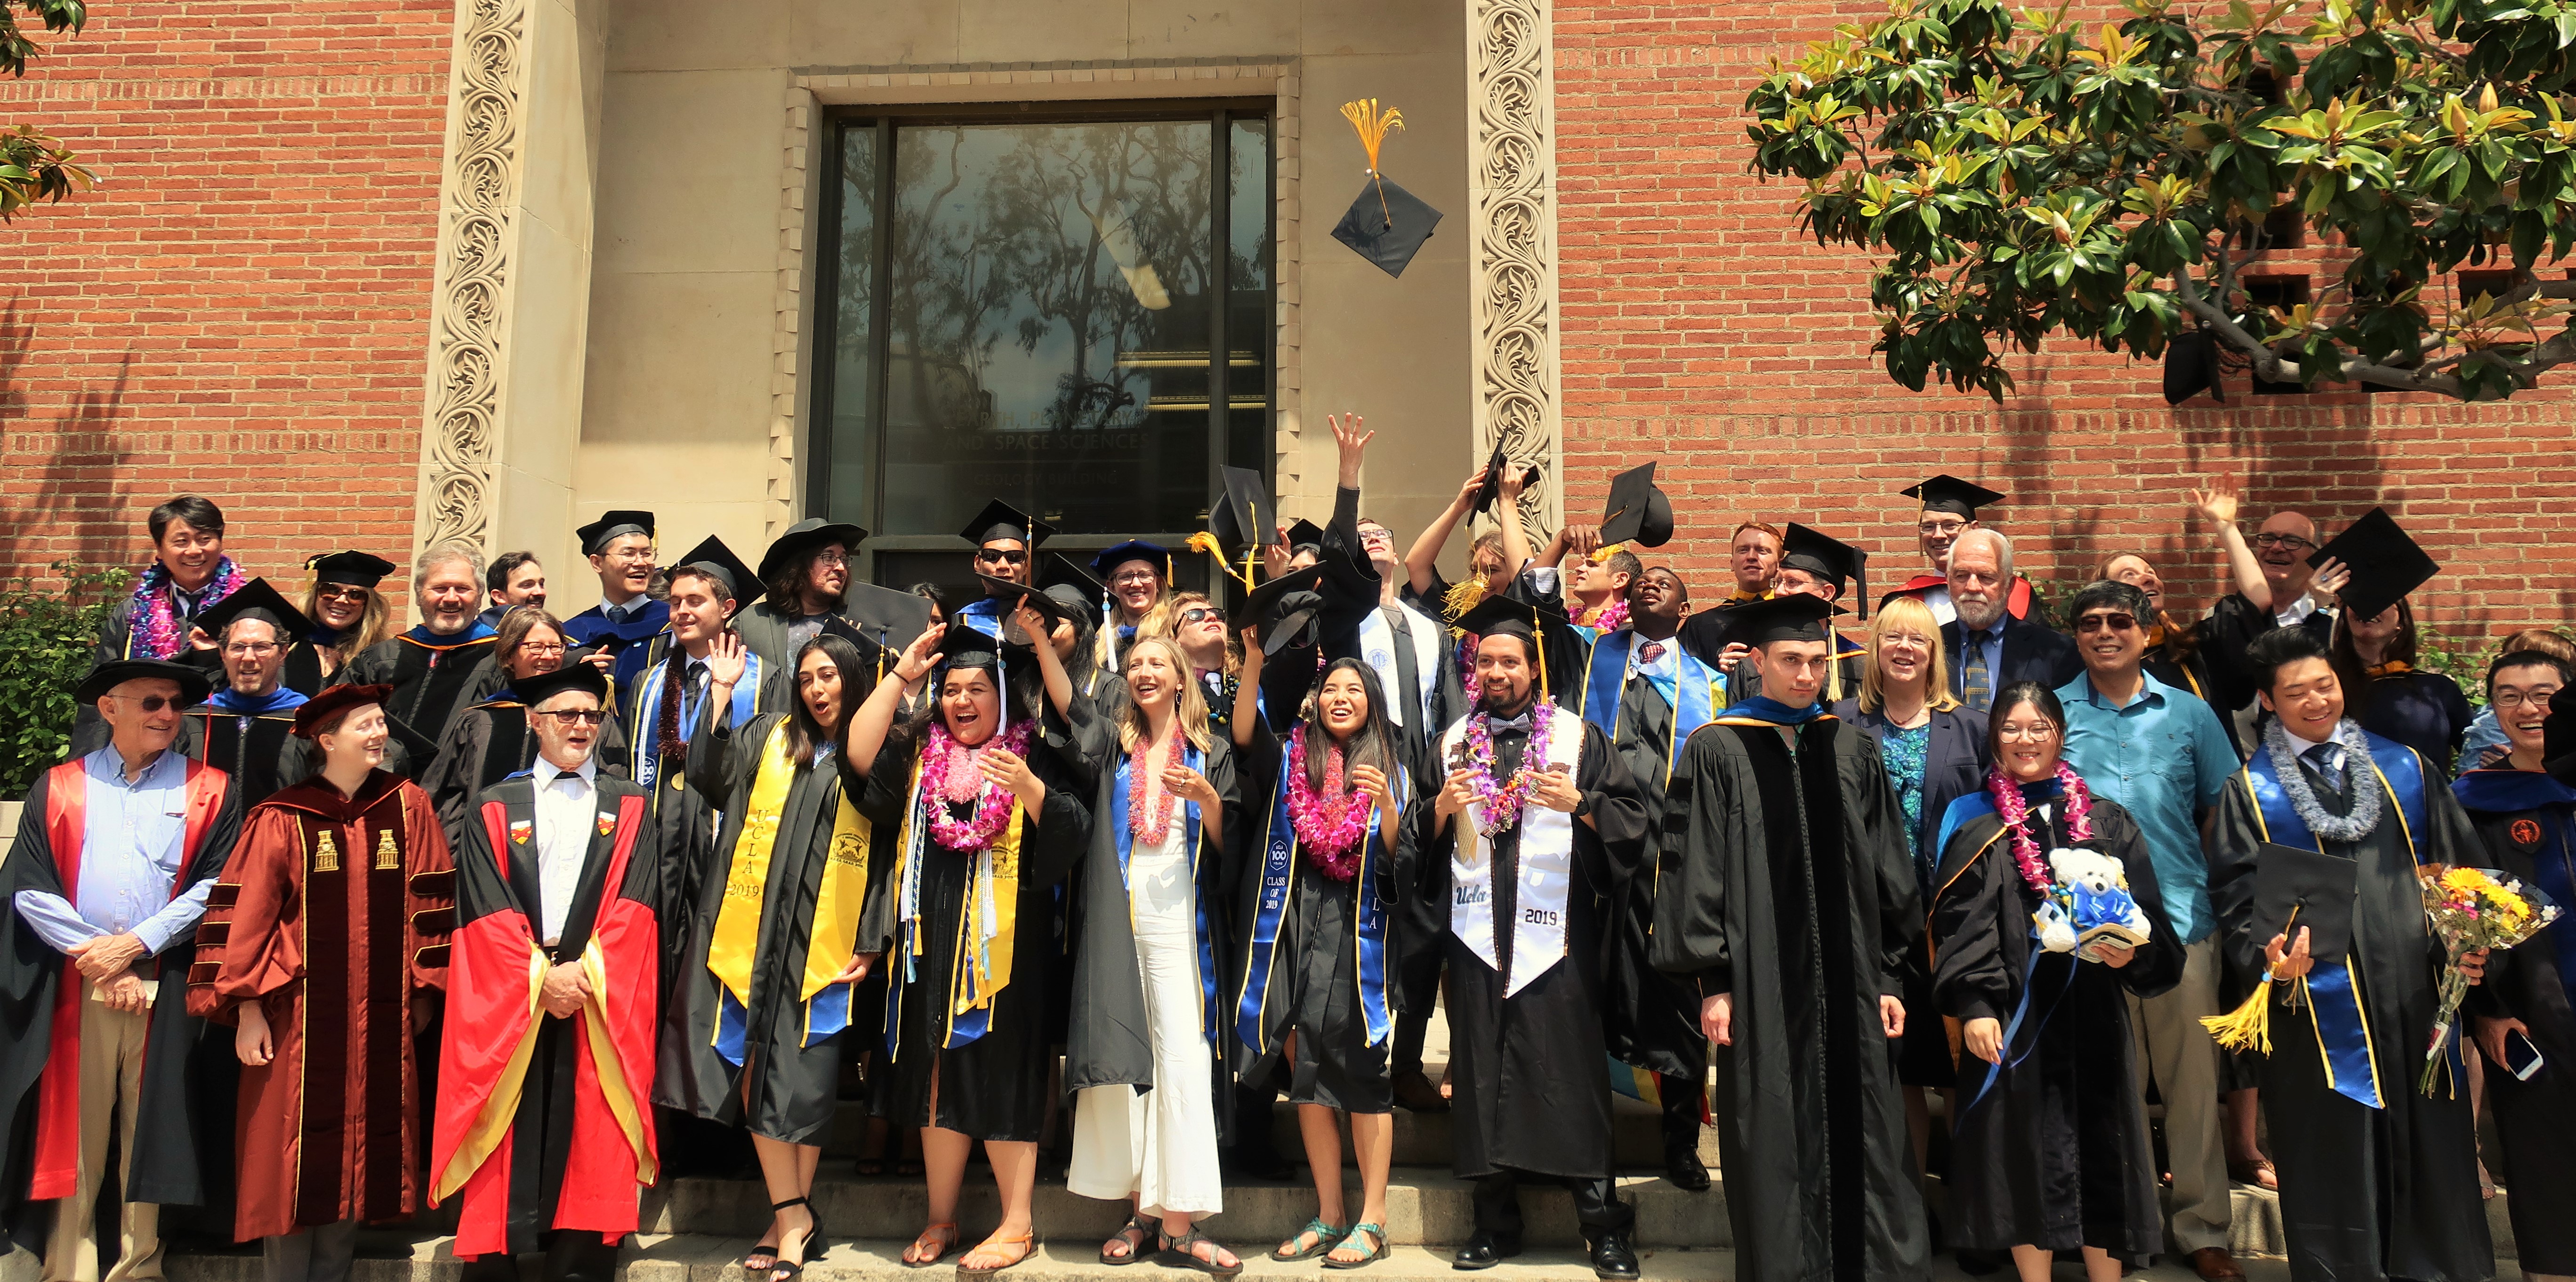 Image: Graduates and Faculty pose together on Geology Building steps, wearing regalia.